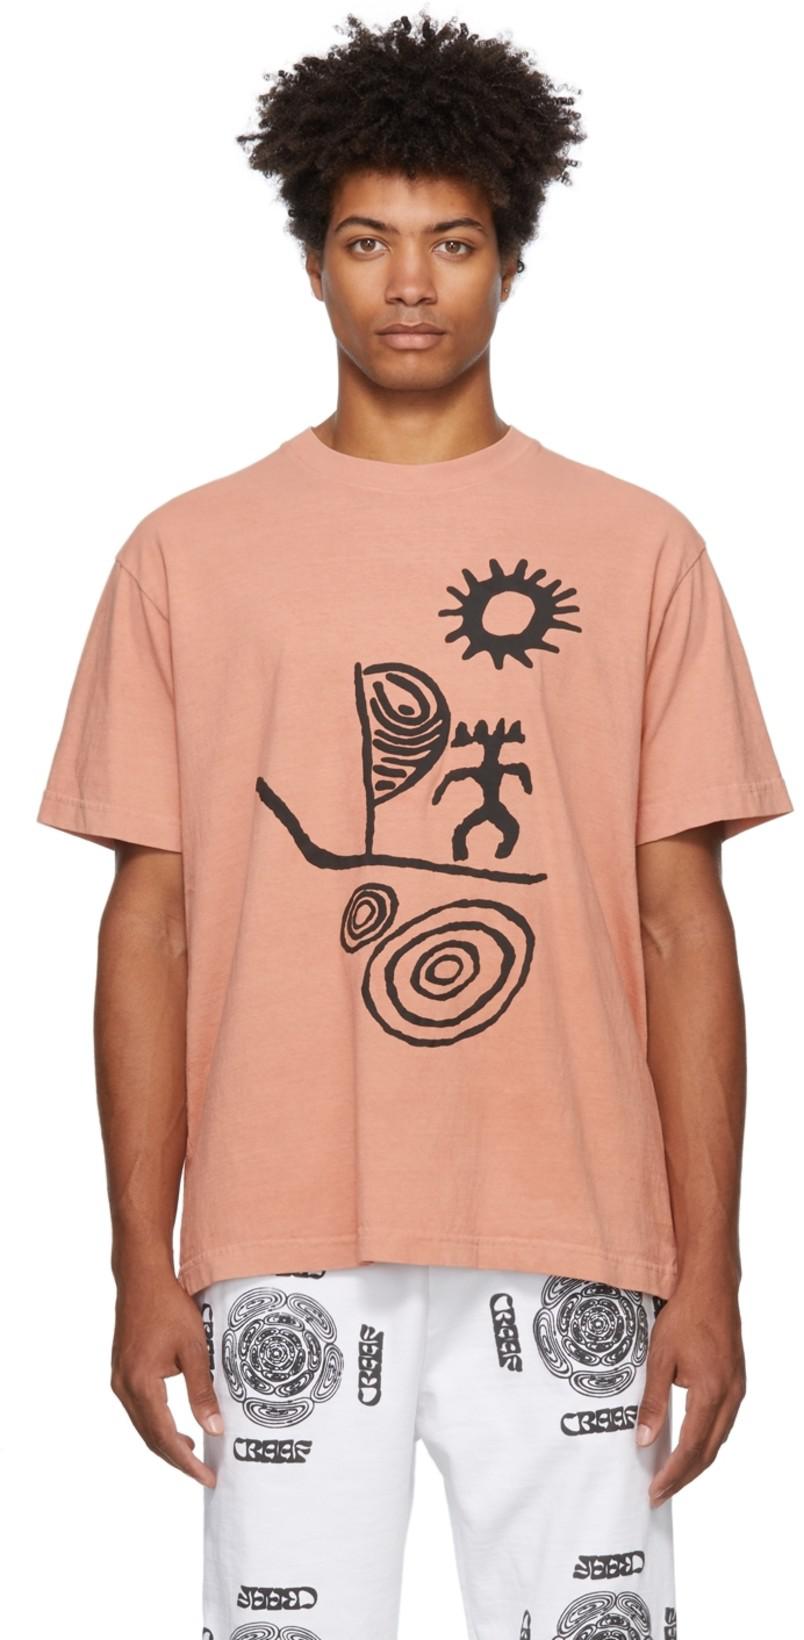 SSENSE Exclusive Ocean Man T-Shirt by COME BACK AS A FLOWER